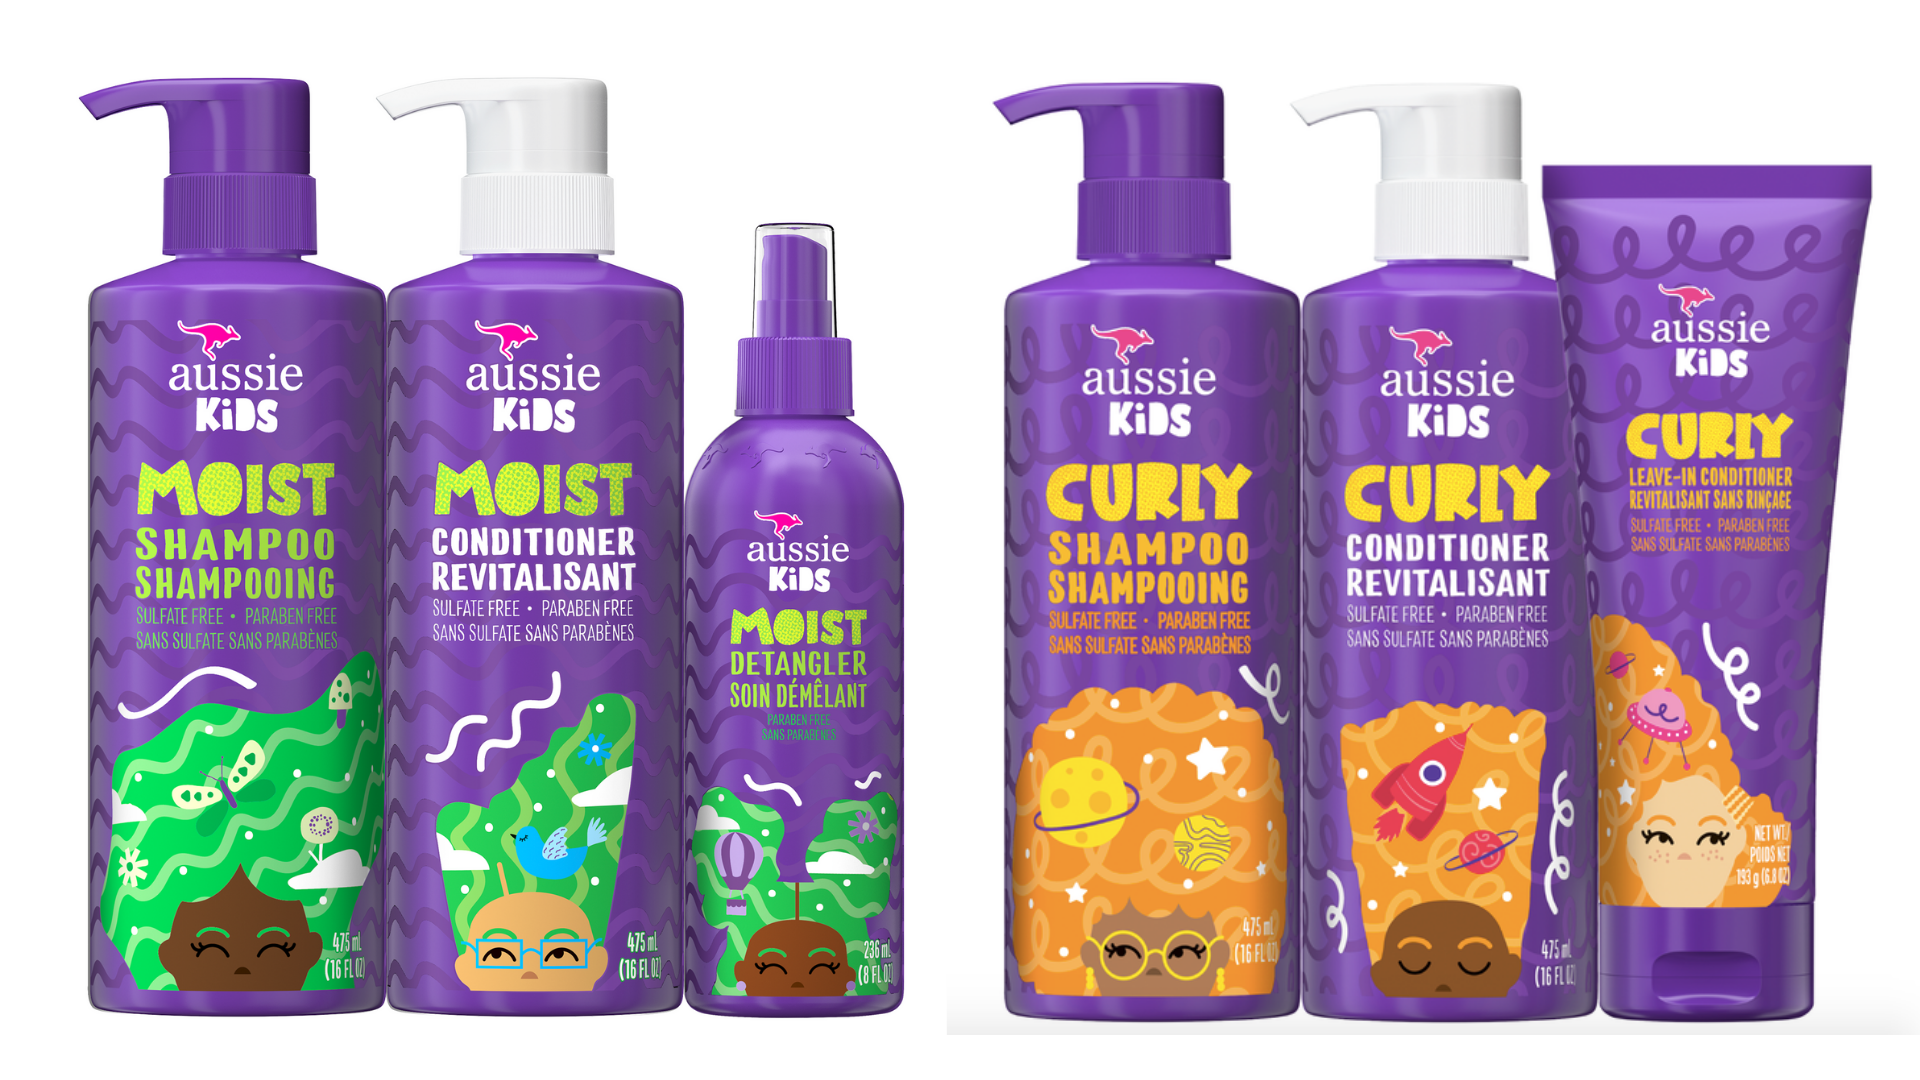 You?ll love this new Aussie Kids hair care line that has a no-compromise offering for kids